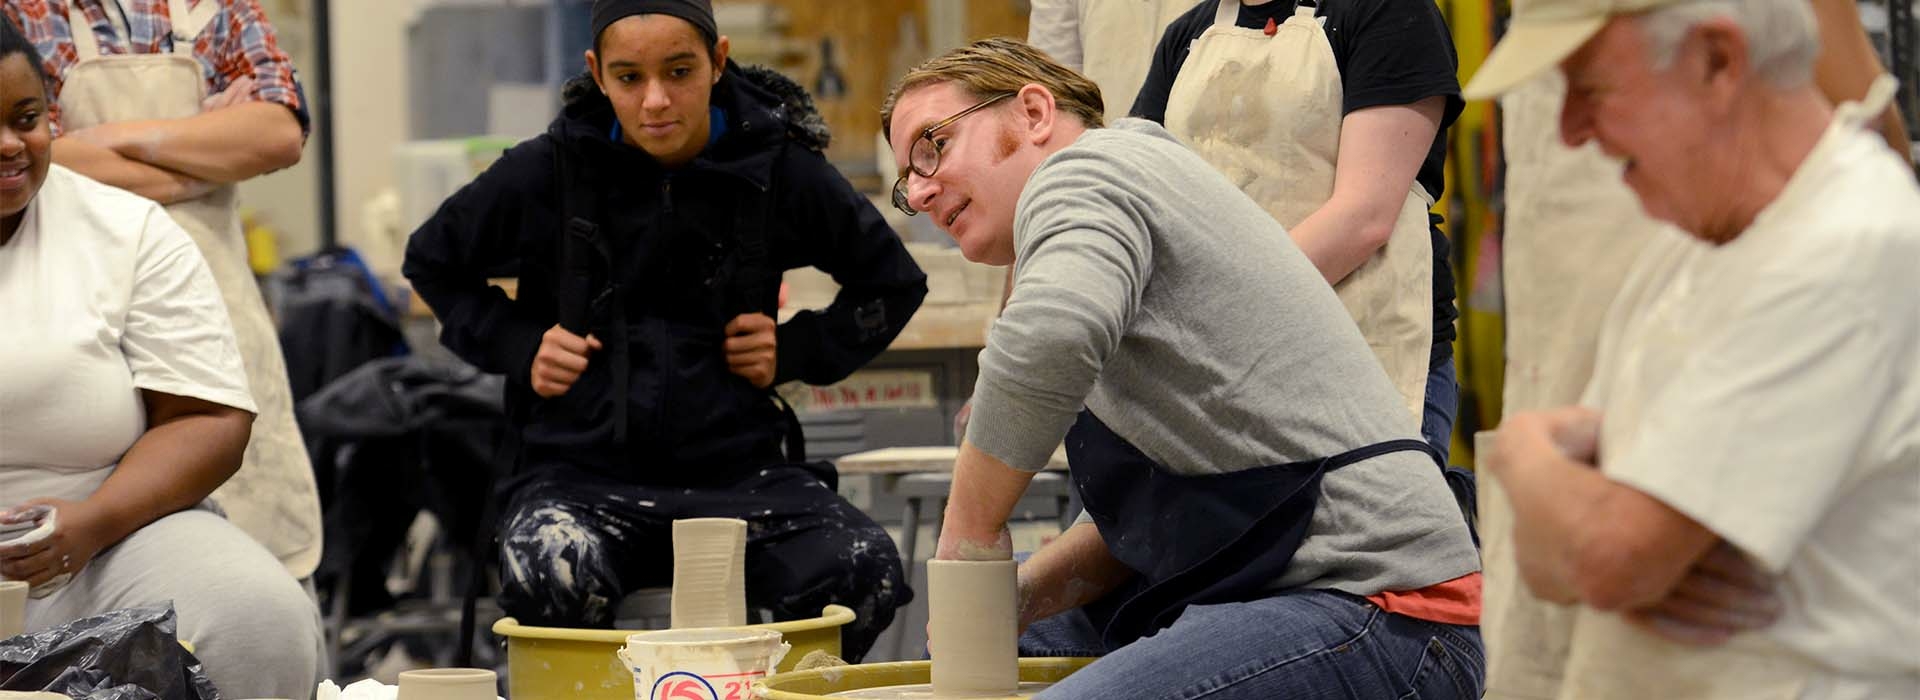 Art faculty member throwing on a ceramics wheel while students watch.